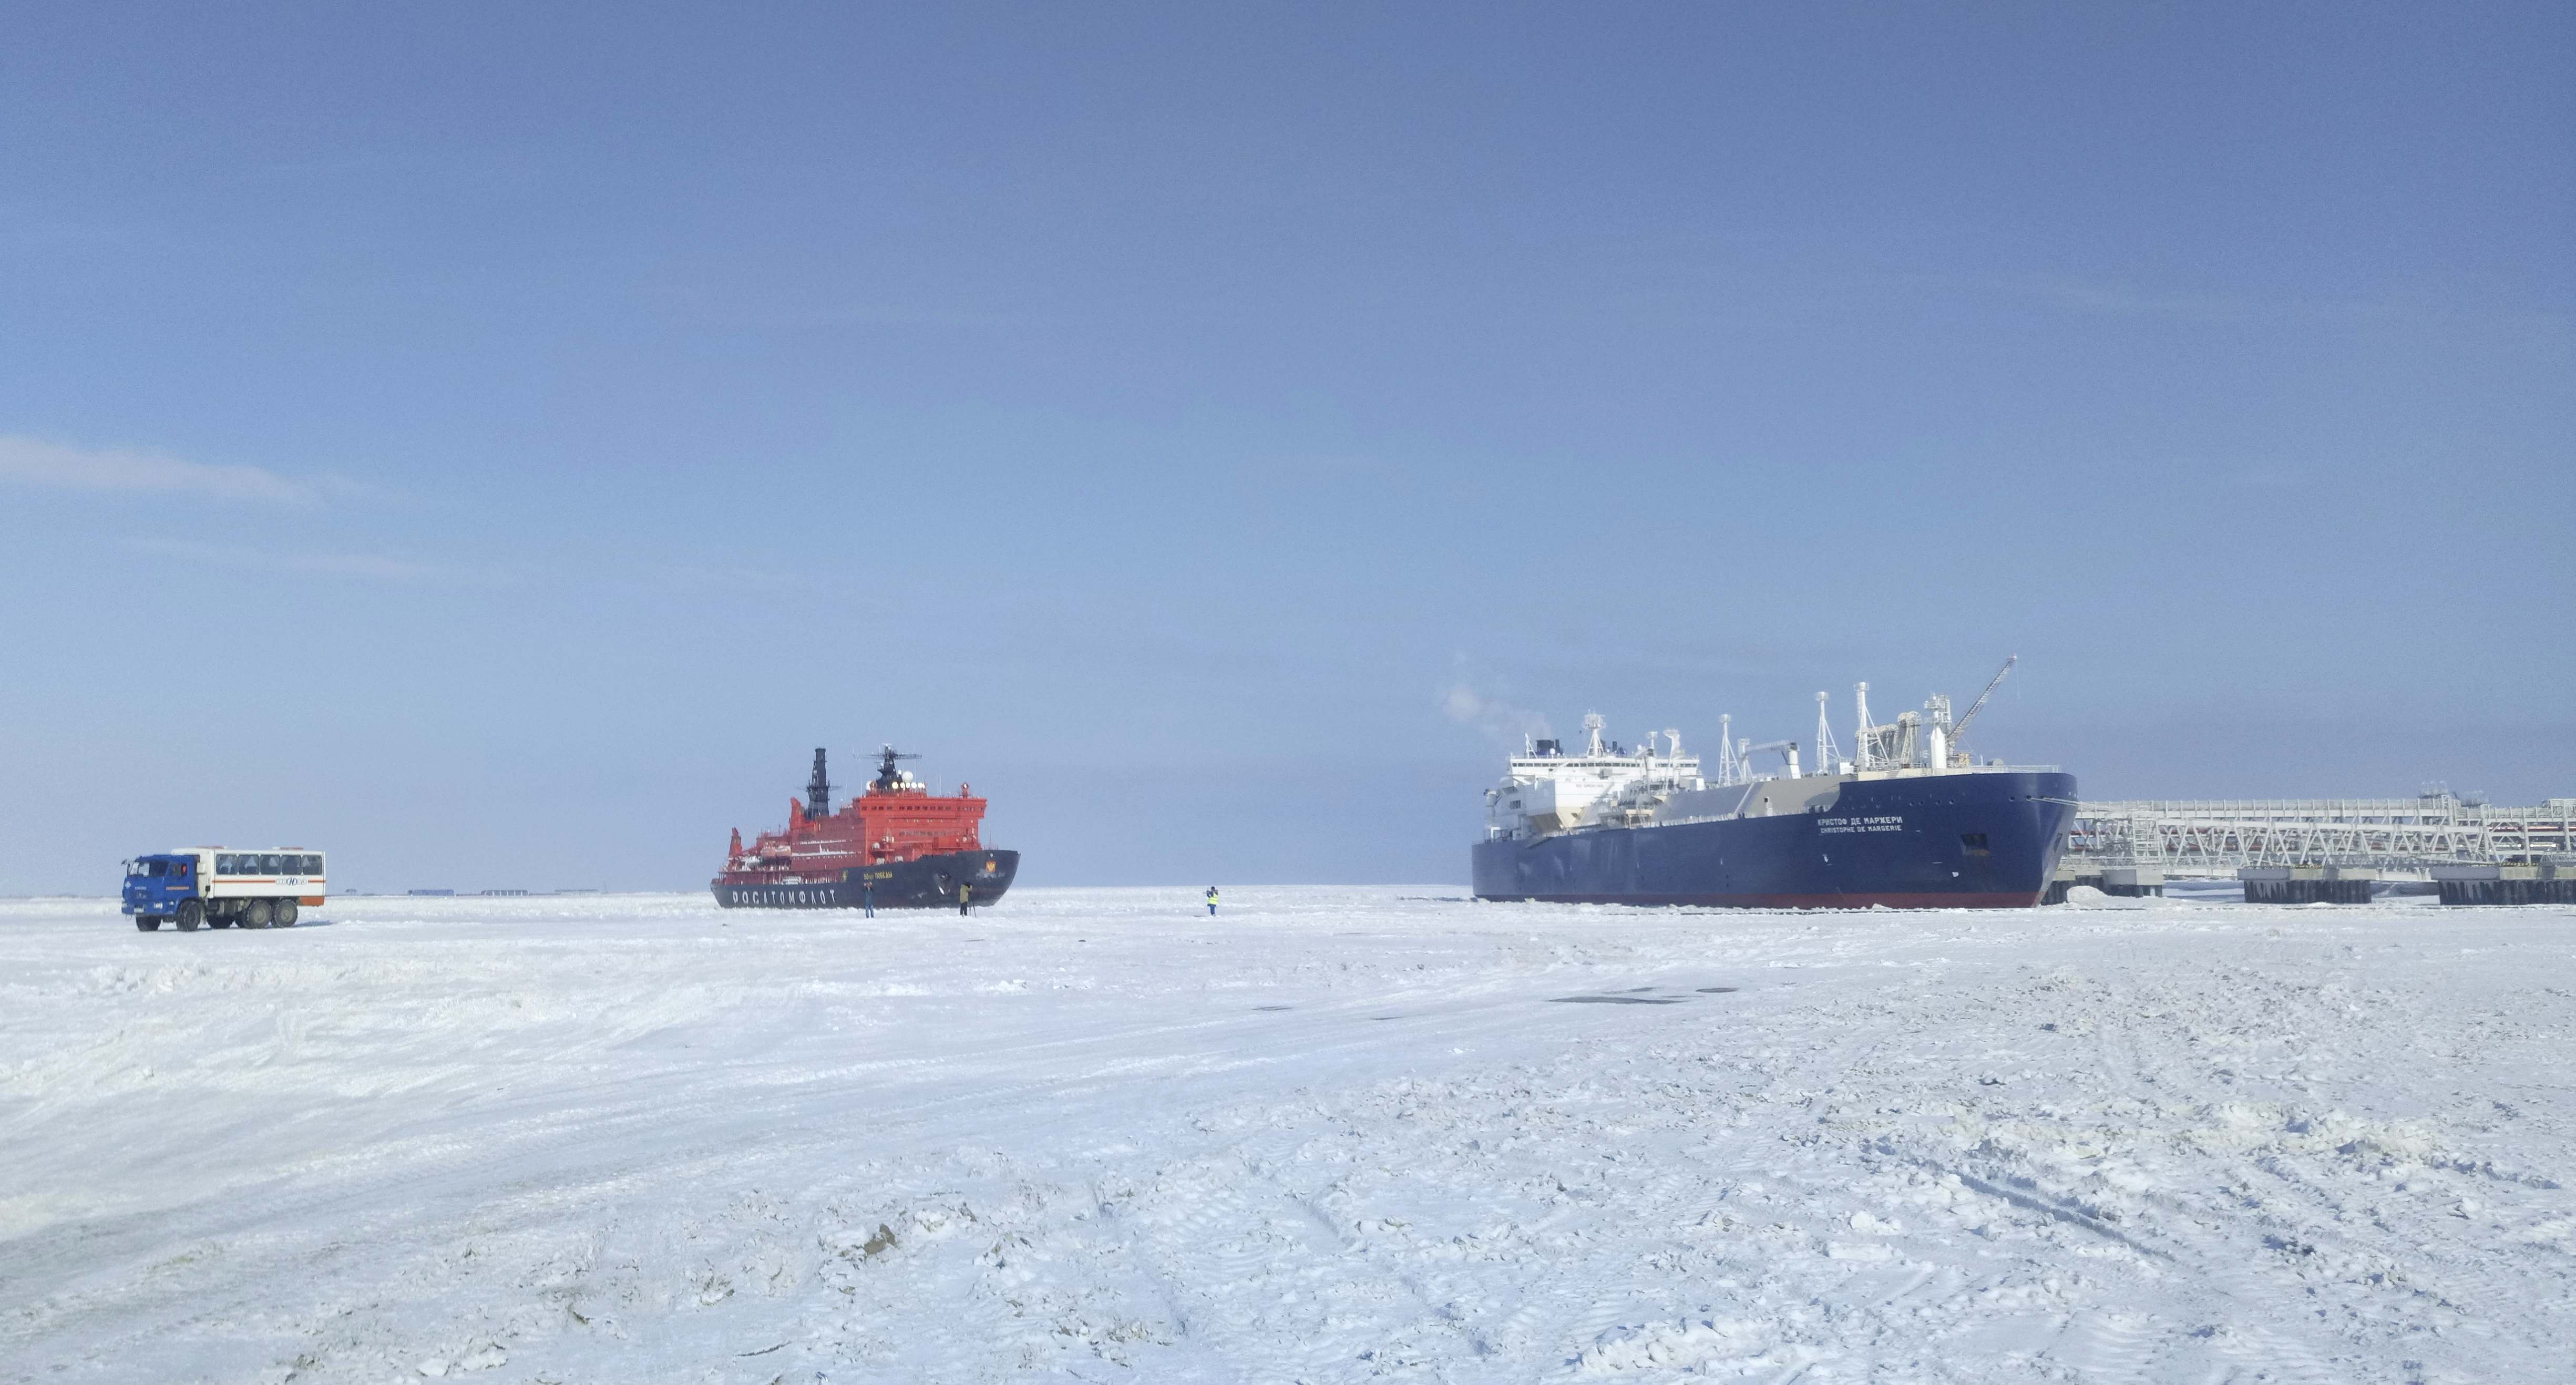 The Christophe de Margerie (R), an ice-class tanker fitted out to transport liquefied natural gas, is docked in Arctic port of Sabetta, Yamalo-Nenets district, Russia March 30, 2017. REUTERS/Olesya Astakhova